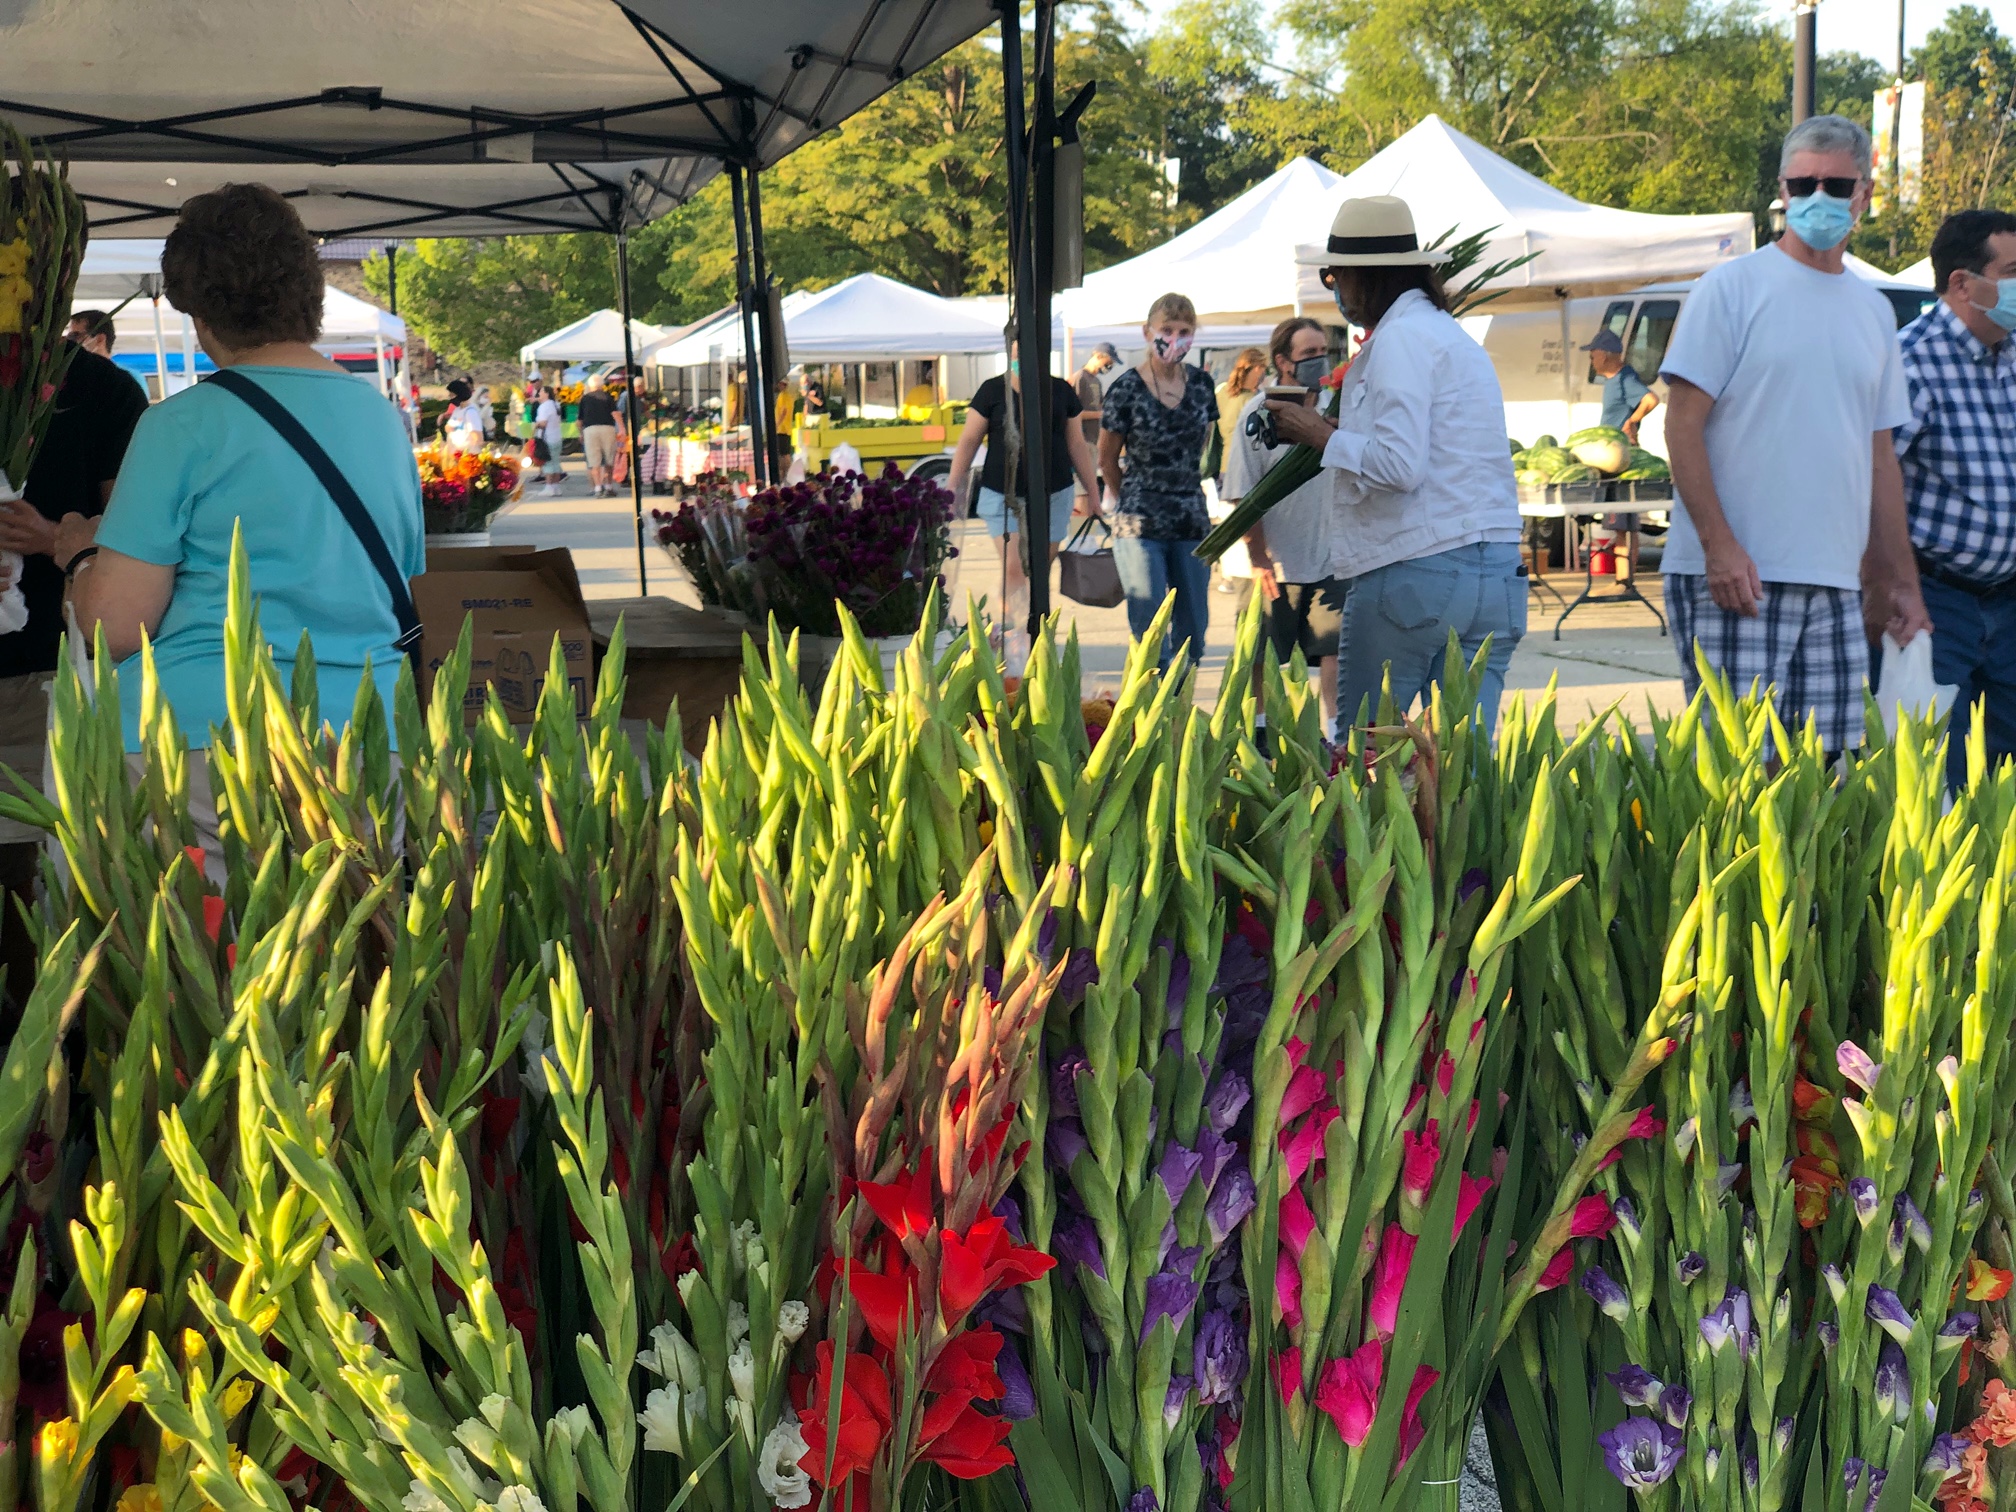 At the outdoor farmers market Urbana in the Square, masked shoppers walk on a sunny day. In the foreground, there are several long bouquets of flowers taking up half of the image. Photo by Alyssa Buckley.